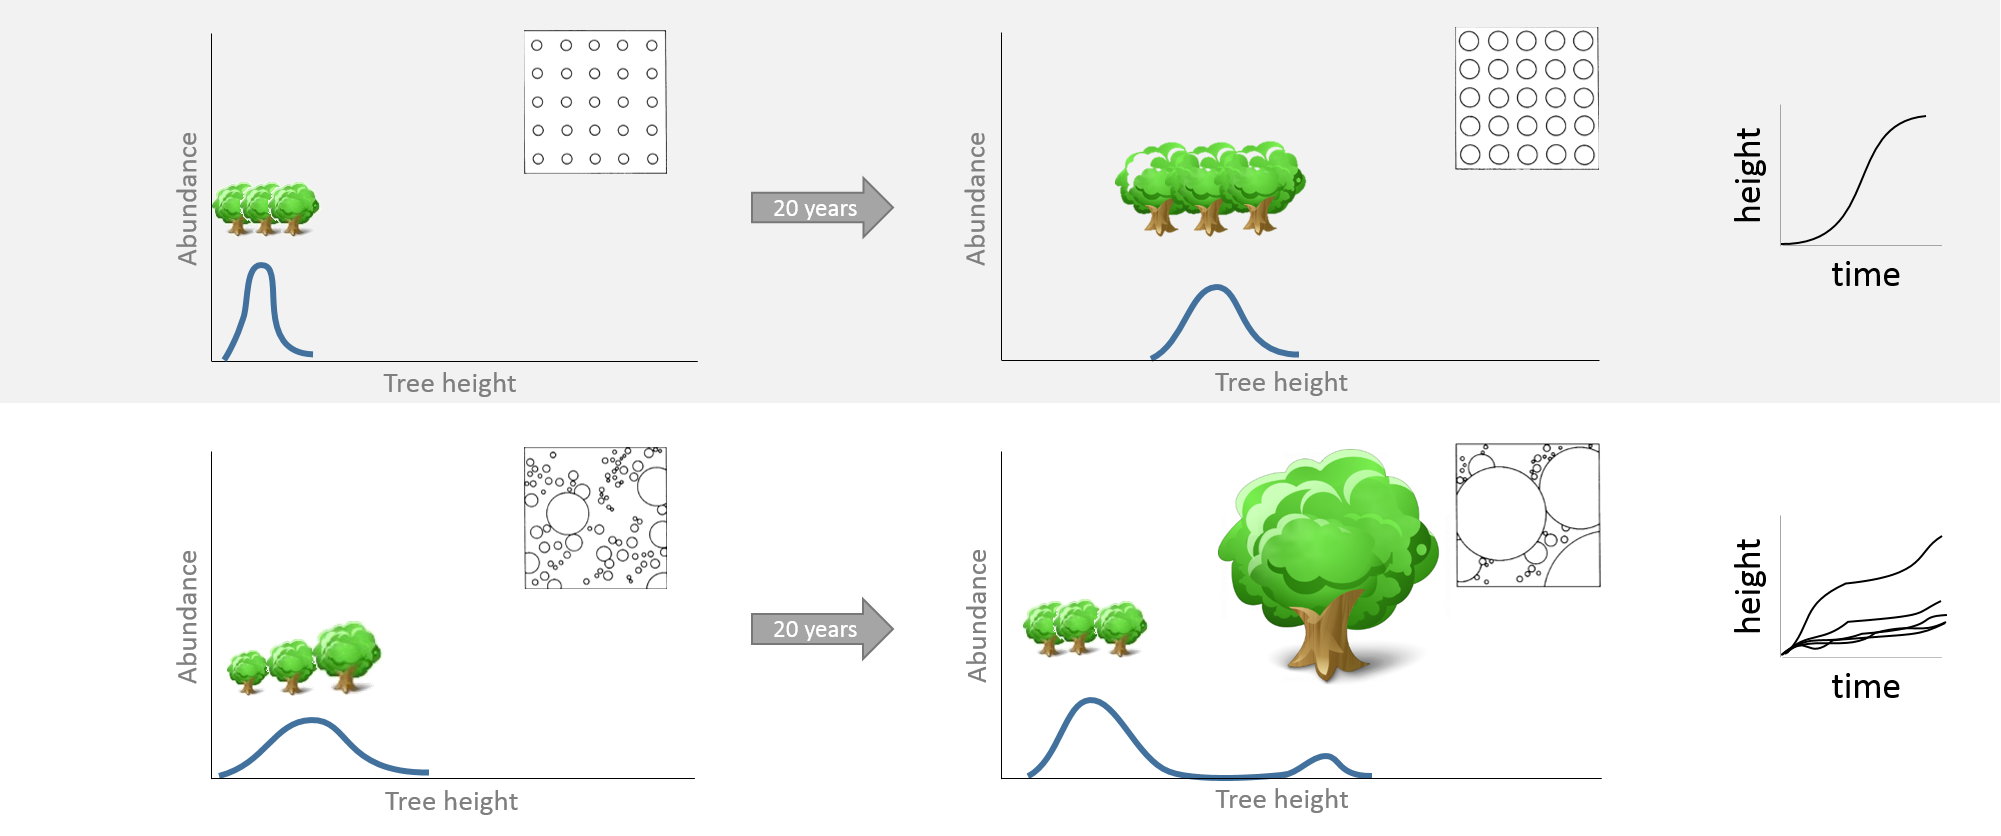 Small individual differences in individuals (here: tree size) can cause distinctly different results on the system level (here: forest stand structure). Modified after Huston et al. [-@huston1988].